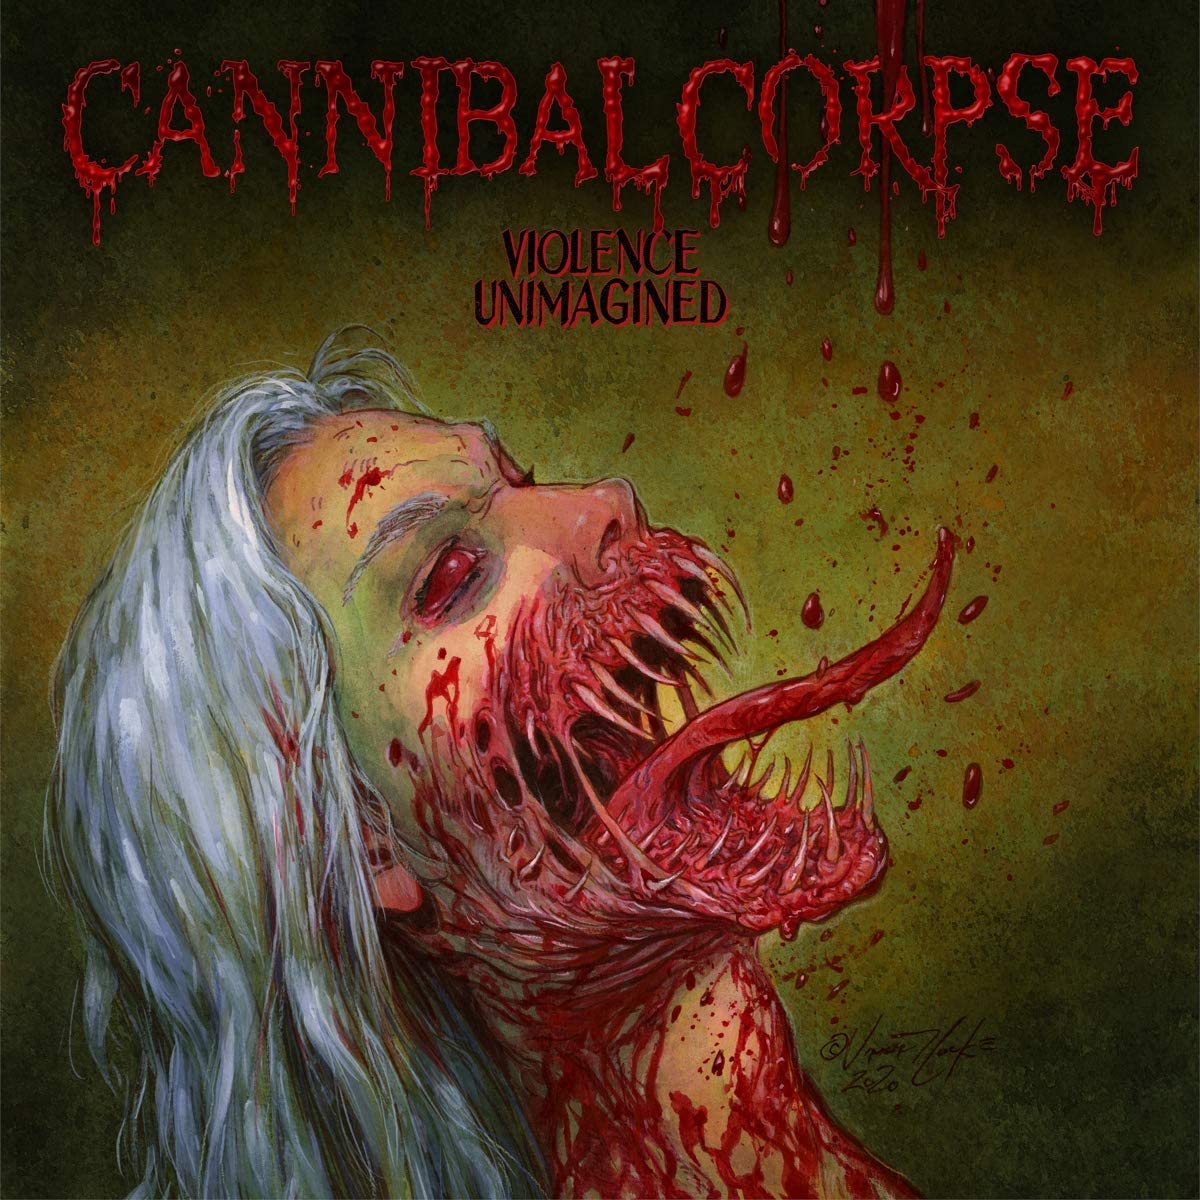 CD - Cannibal Corpse - Violence Unimagined